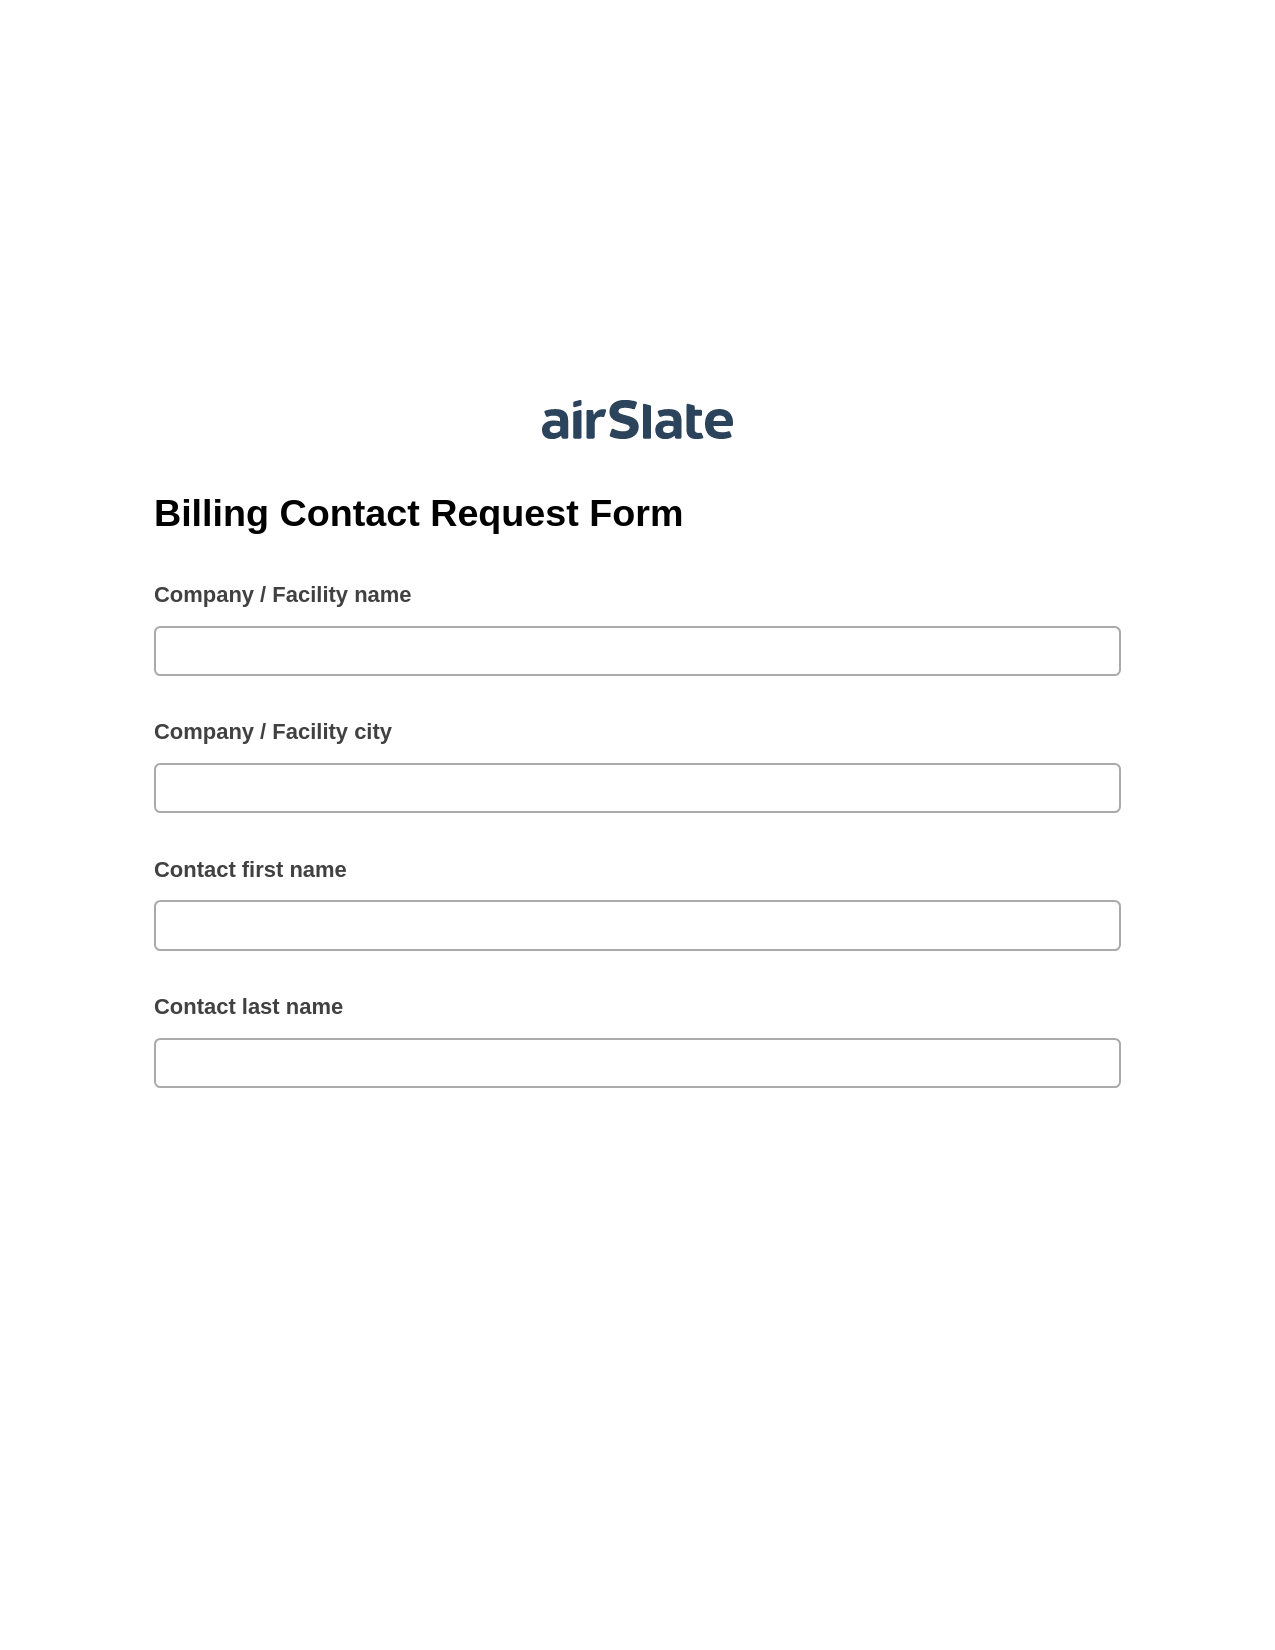 Billing Contact Request Form Pre-fill Dropdown from Airtable, Update MS Dynamics 365 Records Bot, OneDrive Bot